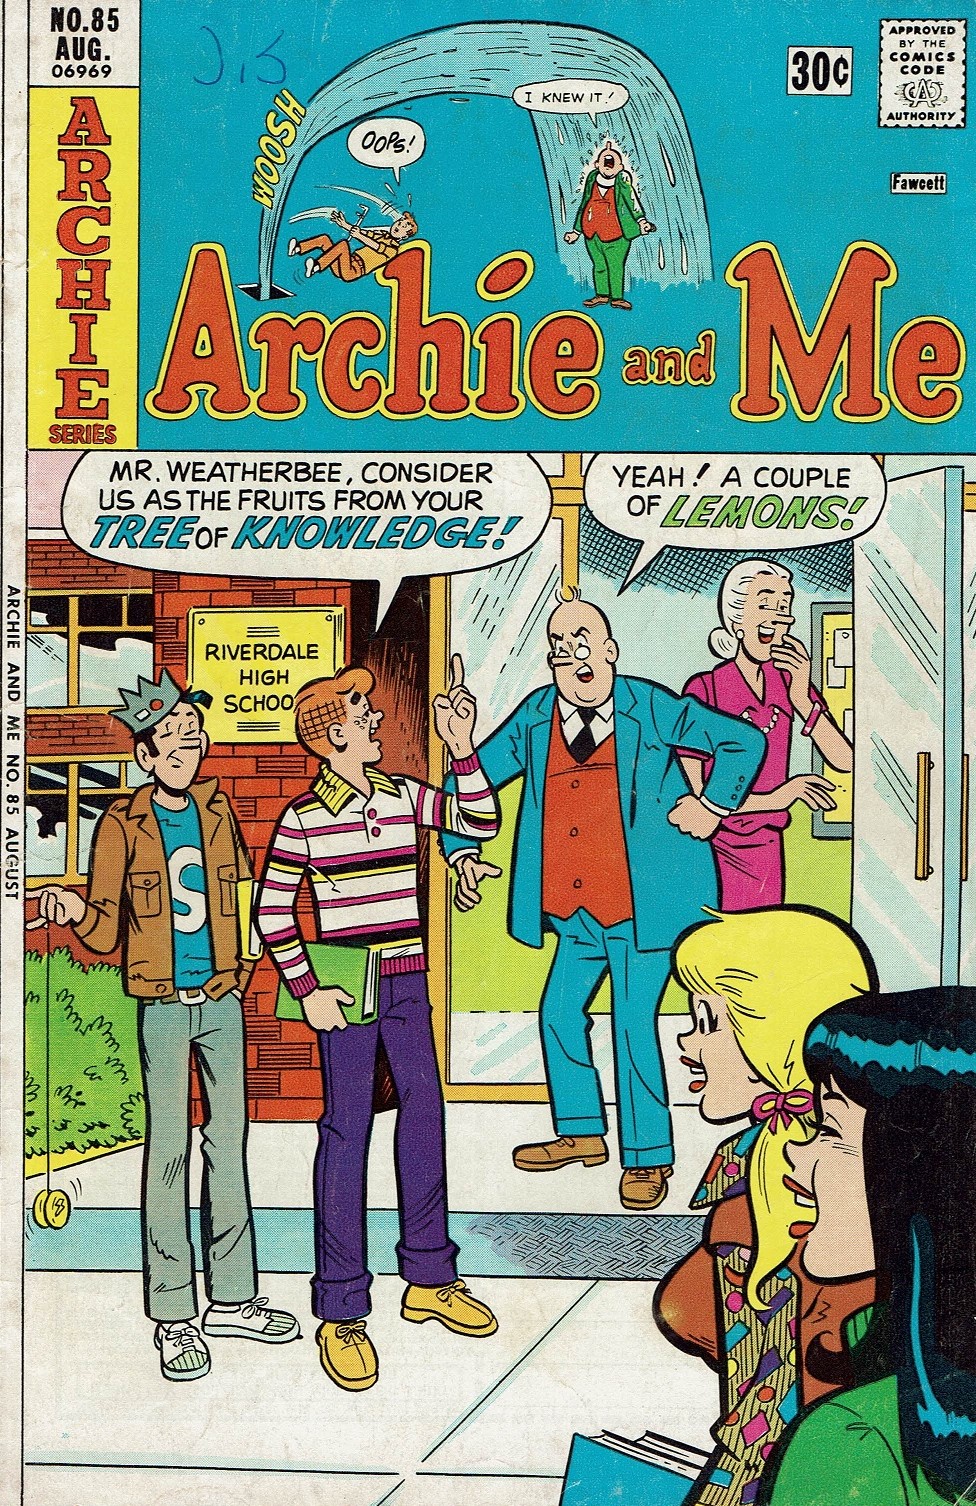 Read online Archie and Me comic -  Issue #85 - 1